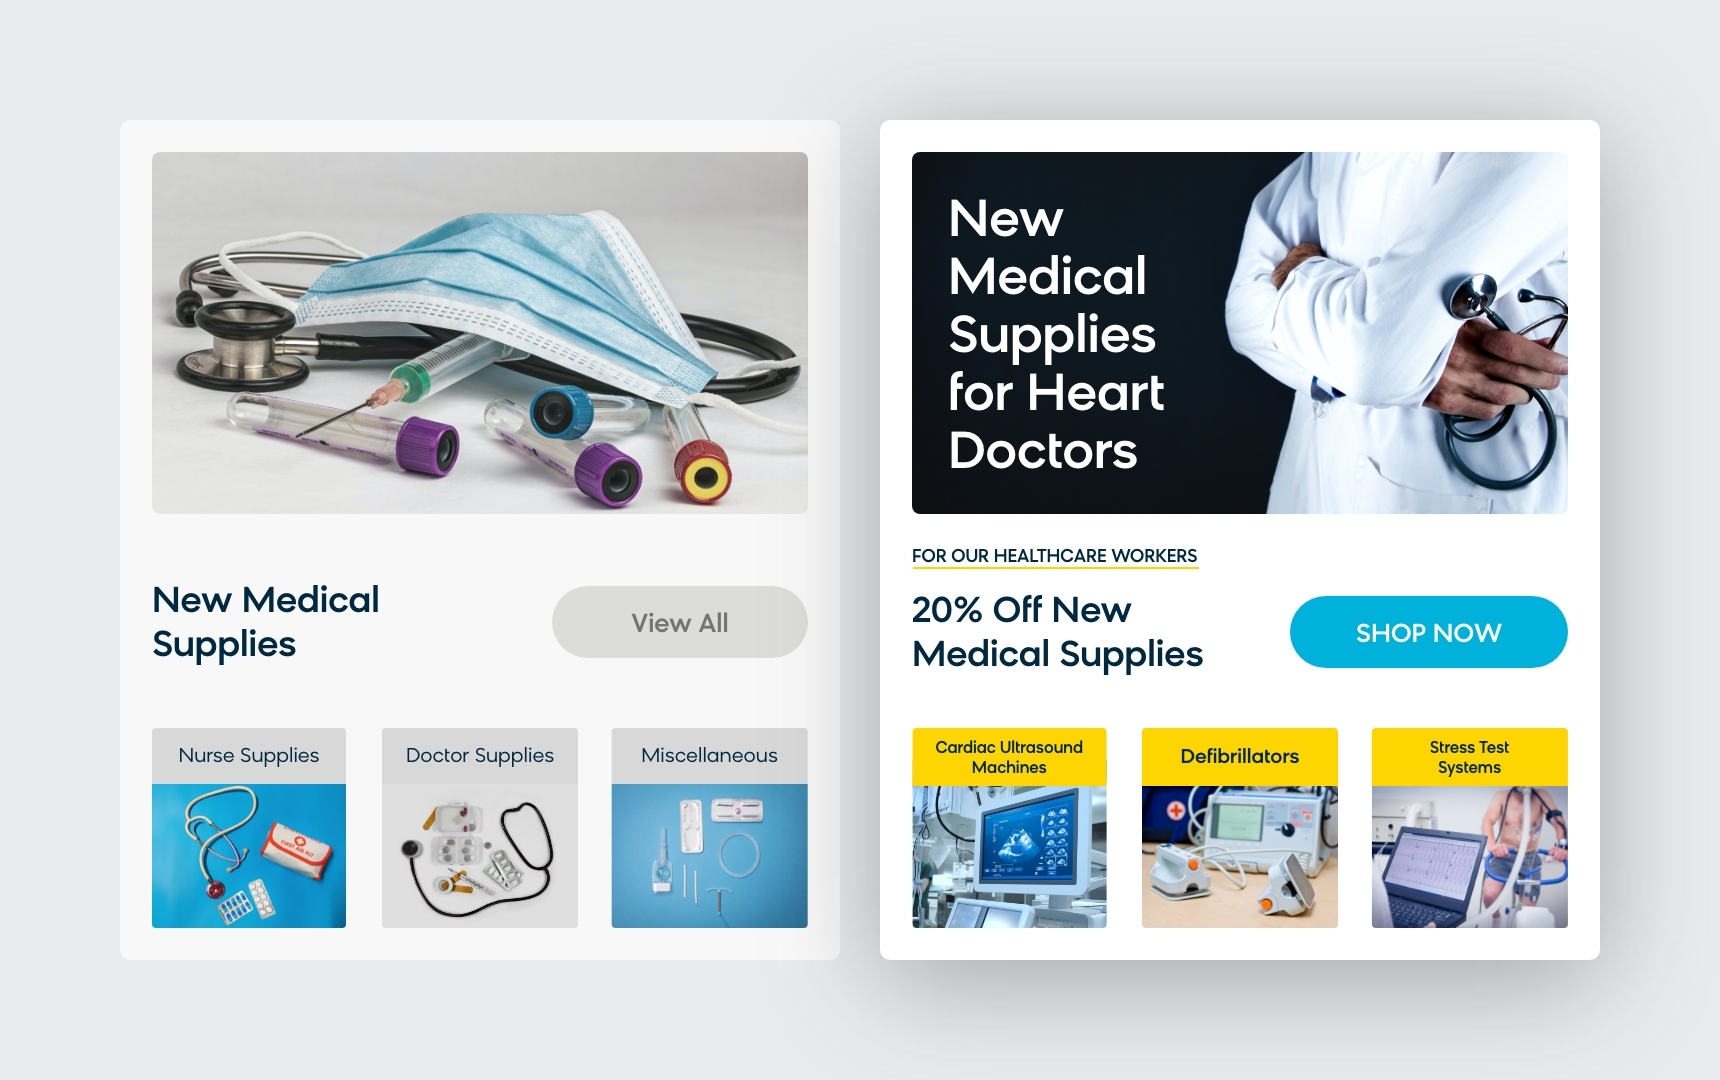 Personalized and Relevant E-Commerce Homepage for a Heart Doctor